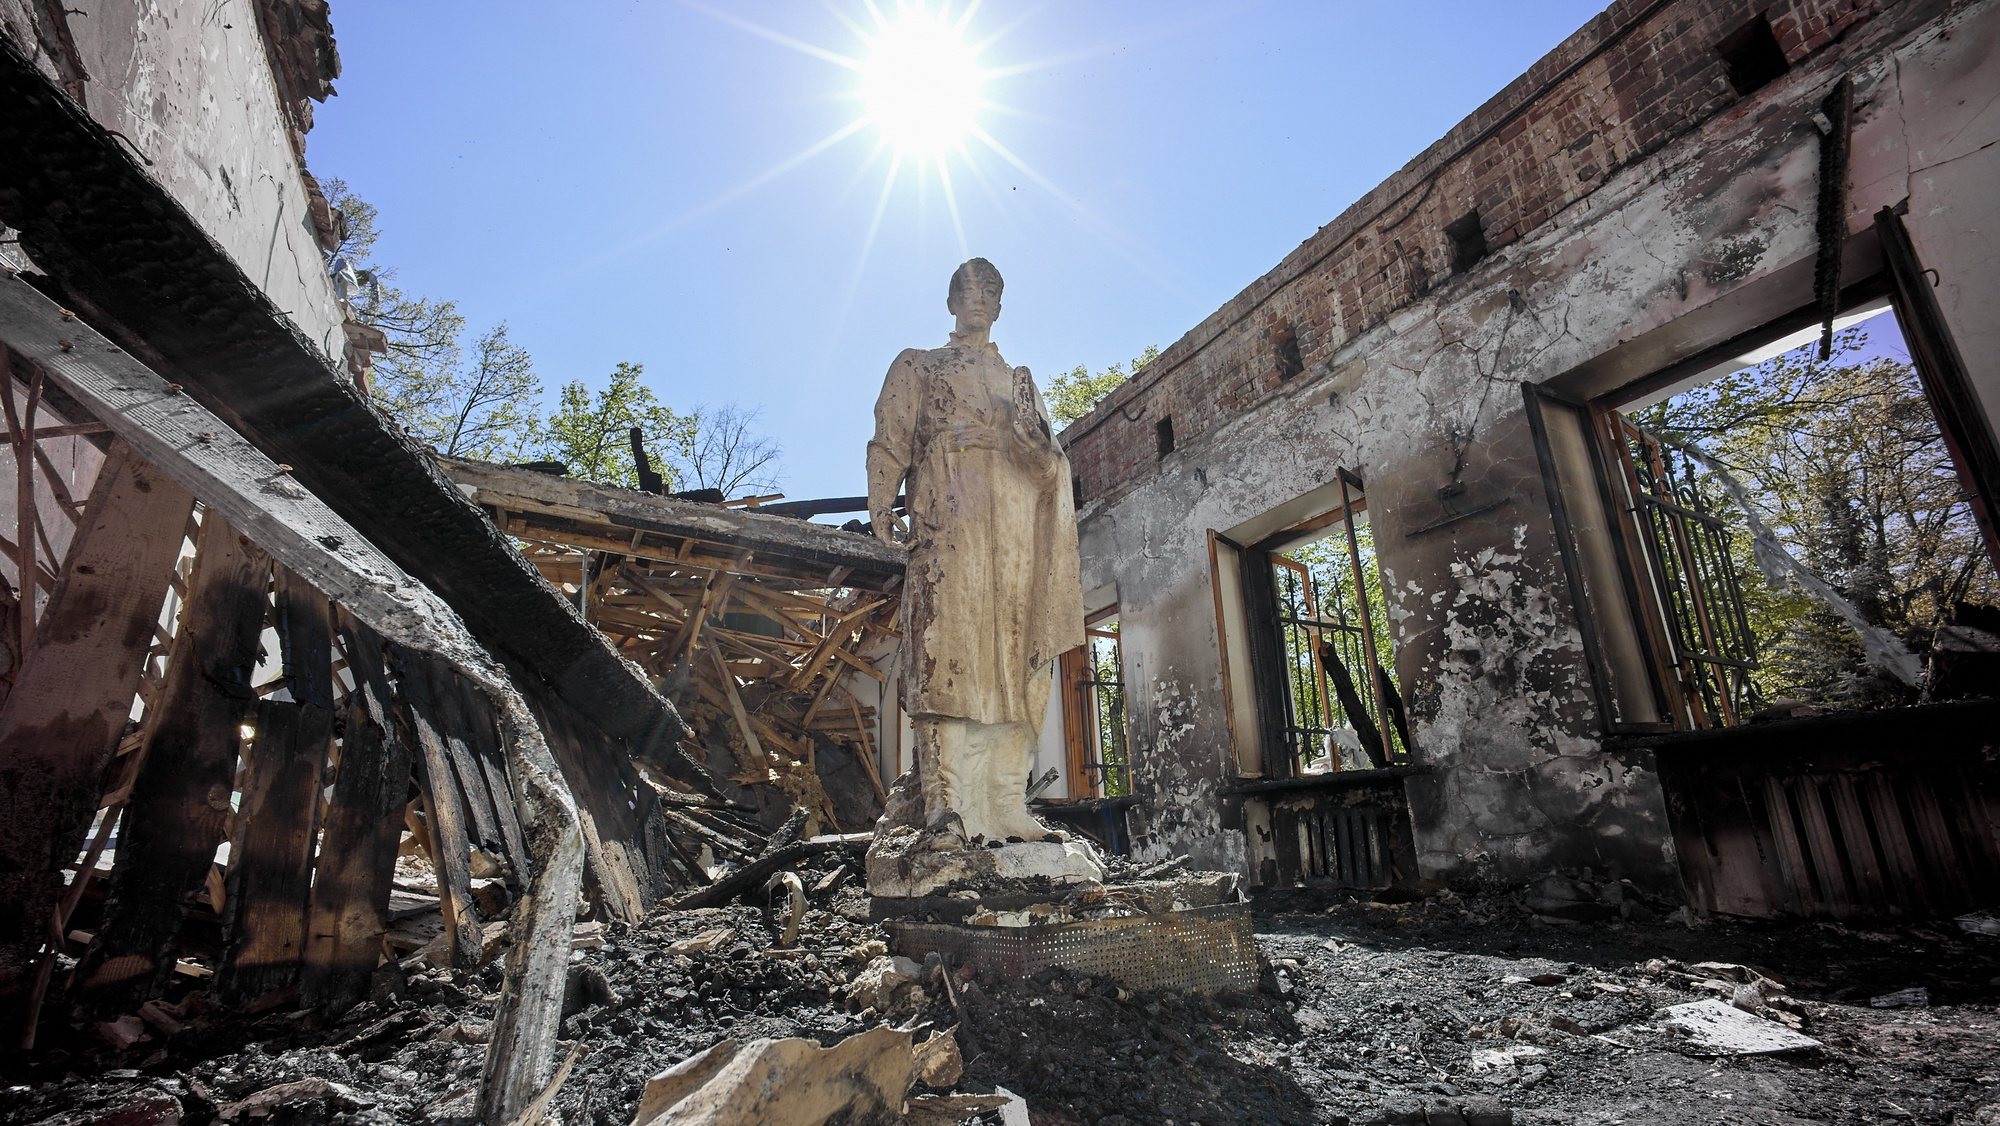 epaselect epa09931872 A view of the statue of Ukrainian philosopher Hryhoriy Skovoroda standing in the damaged Hryhoriy Skovoroda Literary Memorial Museum after shelling in Skovorodynivka village near Kharkiv, Ukraine, 07 May 2022. Skovoroda, a famous philosopher and poet of the 18th century, spent the last years of his life in the estate of local landlords in the village of Ivanovka, which was later renamed in his honor, Skovorodynivka. Russian troops entered Ukraine on 24 February, resulting in fighting and destruction in the country and fears of shortages in energy and food products globally. According to data released by the United Nations High Commission for the Refugees (UNHCR) on 06 May, over 5.8 million refugees have fled Ukraine seeking safety, protection and assistance in neighboring countries, making this the fastest growing refugee crisis since World War II. Western countries have responded with various sets of sanctions against Russian state majority owned companies and interests in a bid to bring an end to the conflict.  EPA/SERGEY KOZLOV